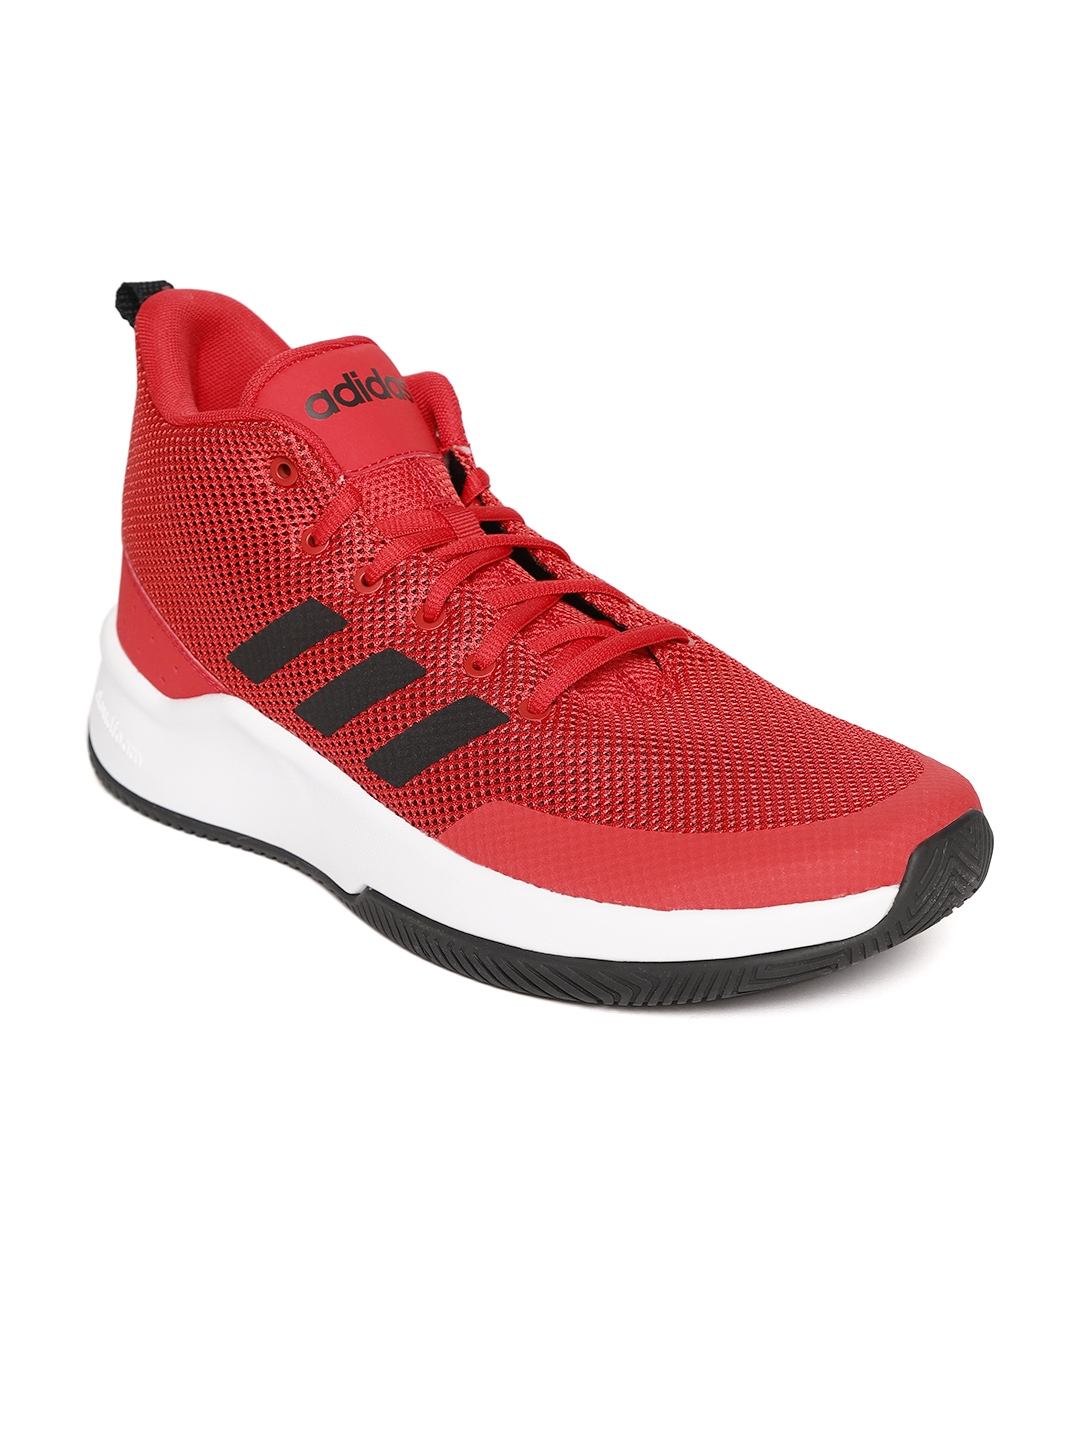 Buy ADIDAS Men Red Basketball Shoes 